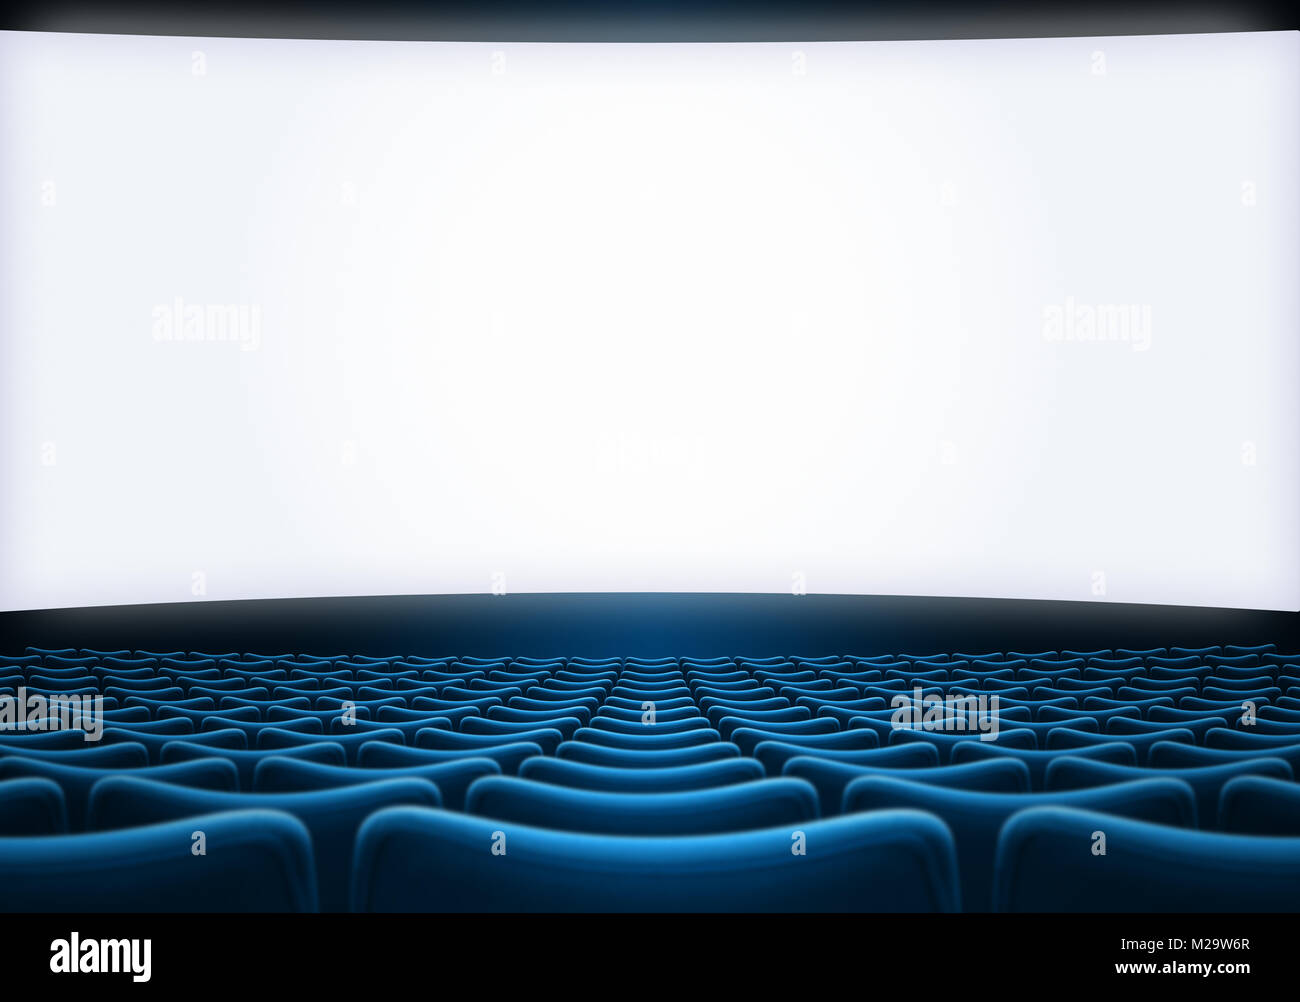 movie theater screen with blue seats Stock Photo